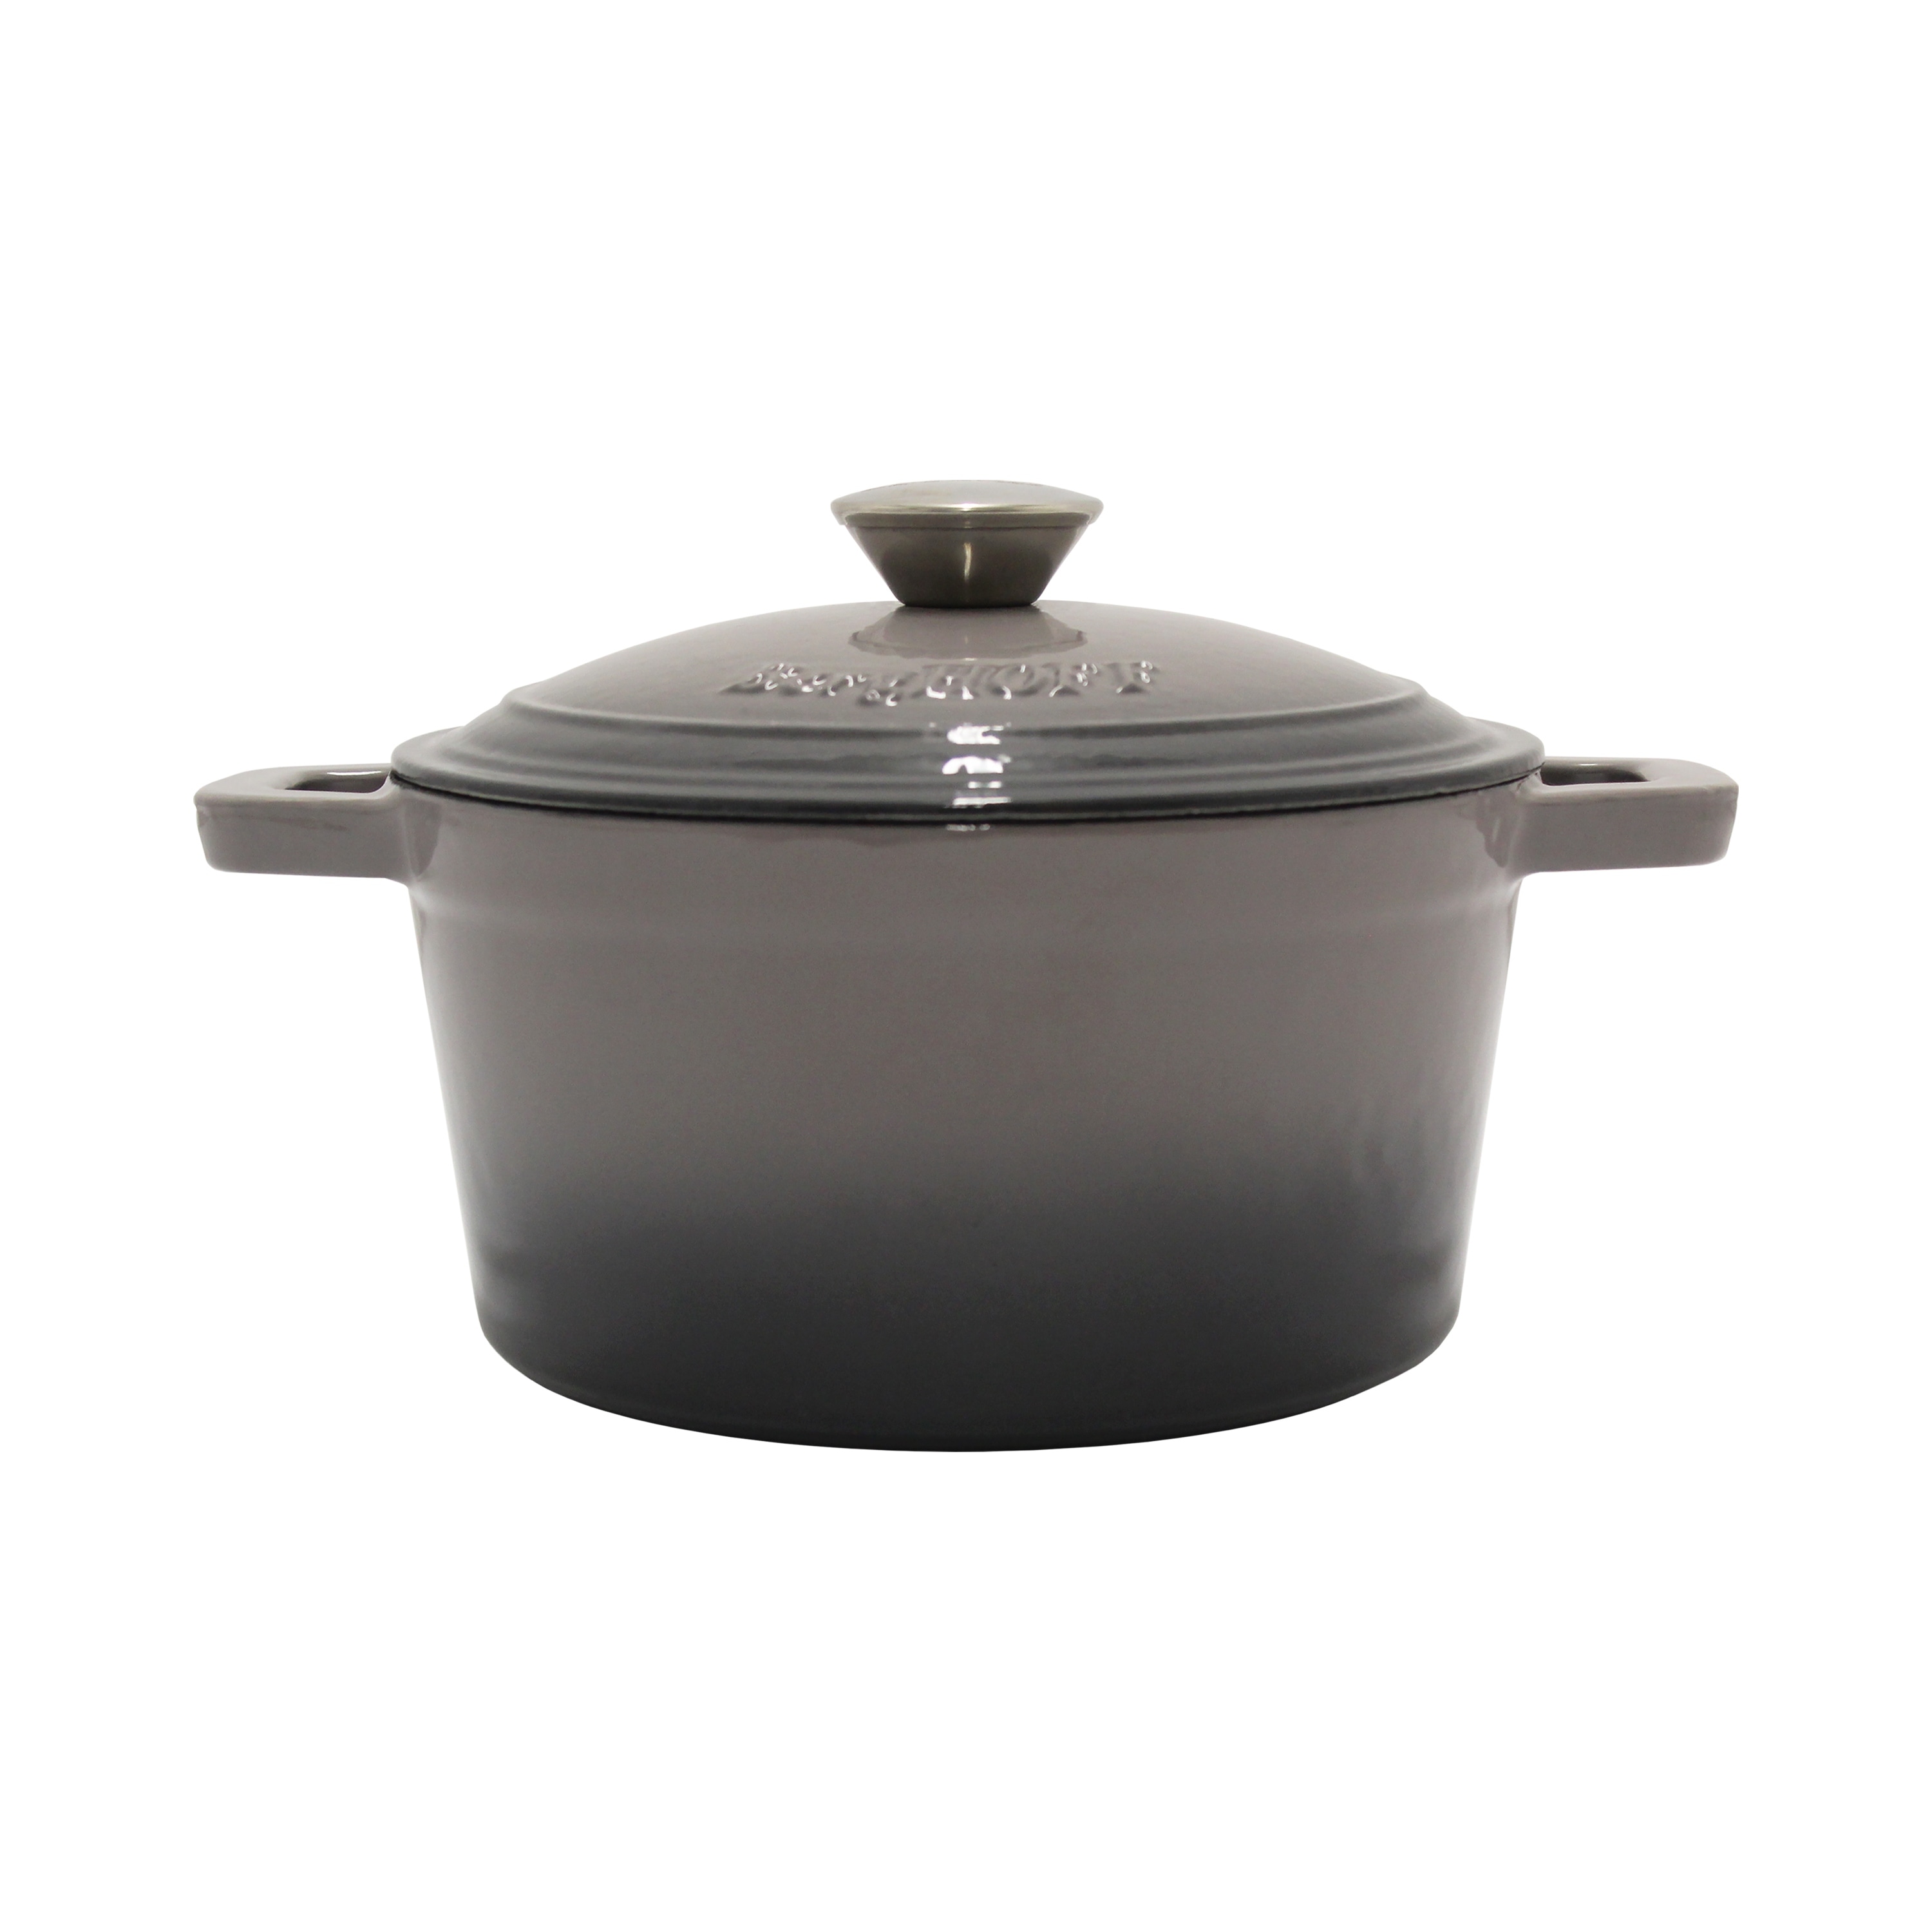 https://ak1.ostkcdn.com/images/products/is/images/direct/07db03e041e3a28c965b98827025a77e10a5e4a3/Neo-3qt-Cast-Iron-Cov-Dutch-Oven%2C-Oyster.jpg